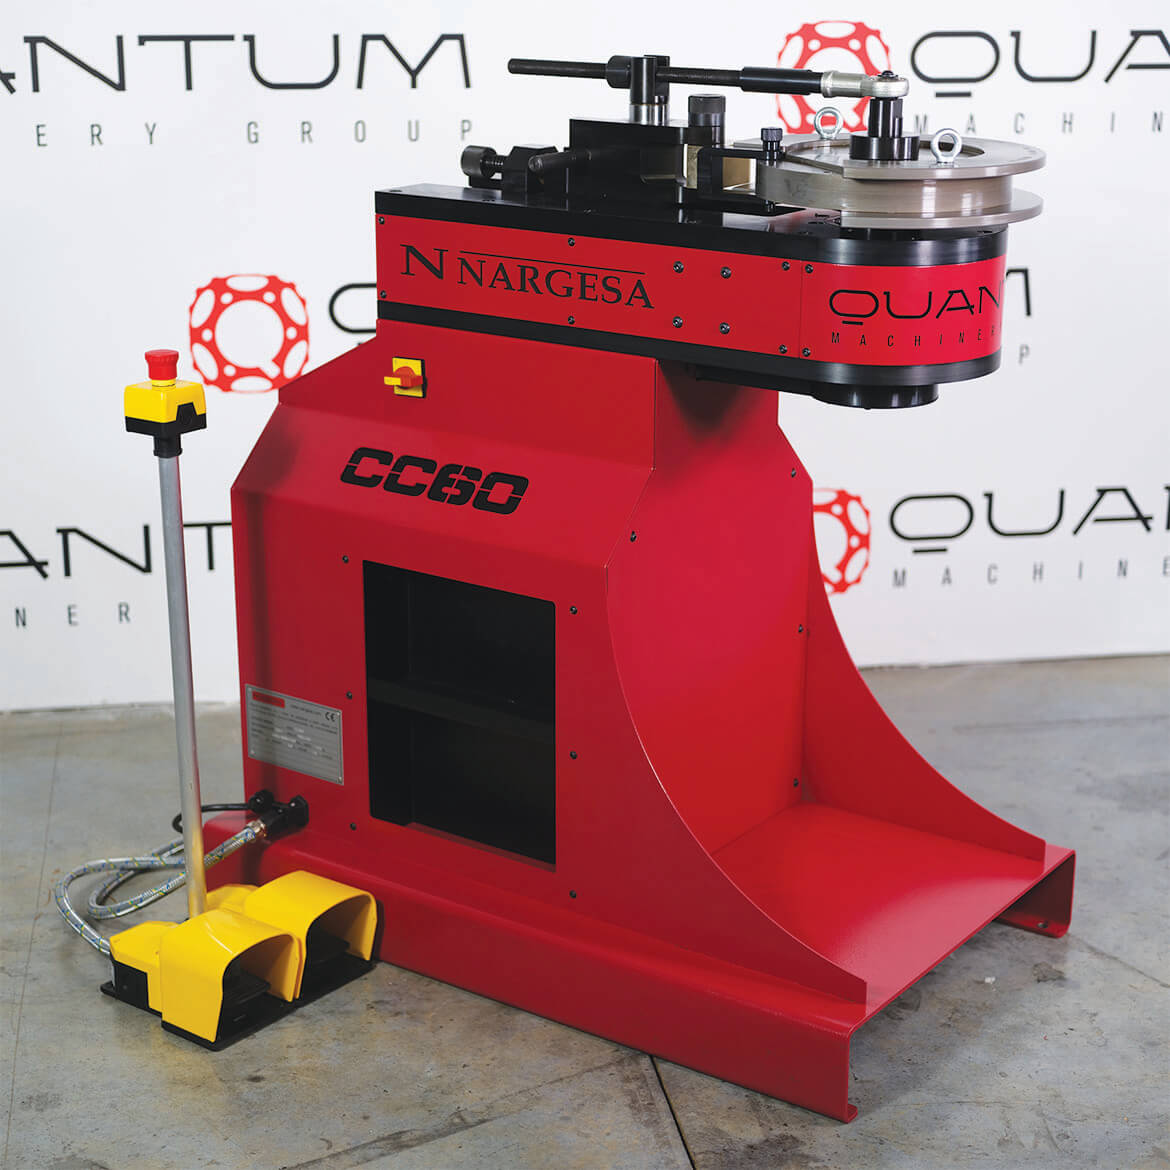 CC60CNC: Non-Mandrel Rotary Bender (Bend up to 2" Pipe)